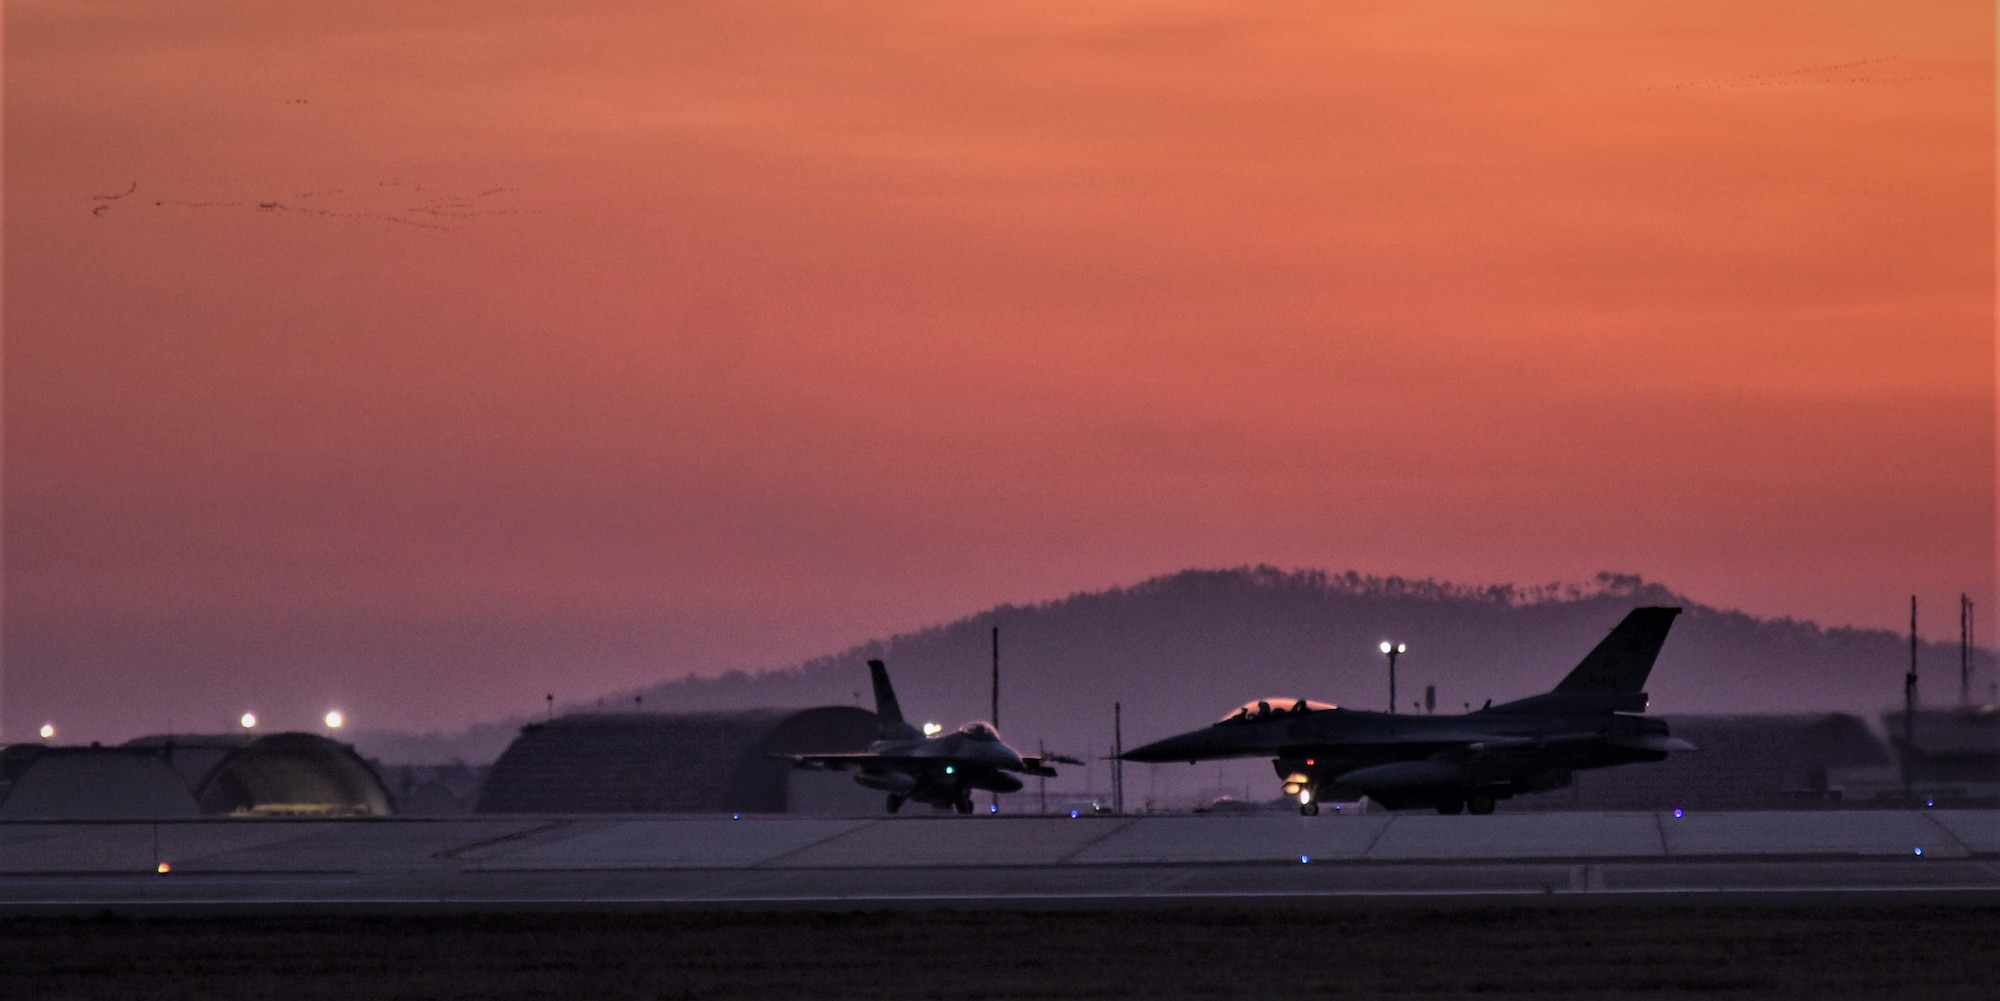 F-16 Fighting Falcons from the 8th Fighter Wing, taxi before take-off during a training event at Kunsan Air Base, Republic of Korea, March 24, 2021. The F-16 Fighting Falcon is a compact, multi-role fighter aircraft that is highly maneuverable in air-to-air combat and air-to-surface attack. It can reach top speeds of 1,500 mph and can reach altitudes of more than 50,000 feet. (U.S. Air Force photo by Tech. Sgt. Kristin S. High)